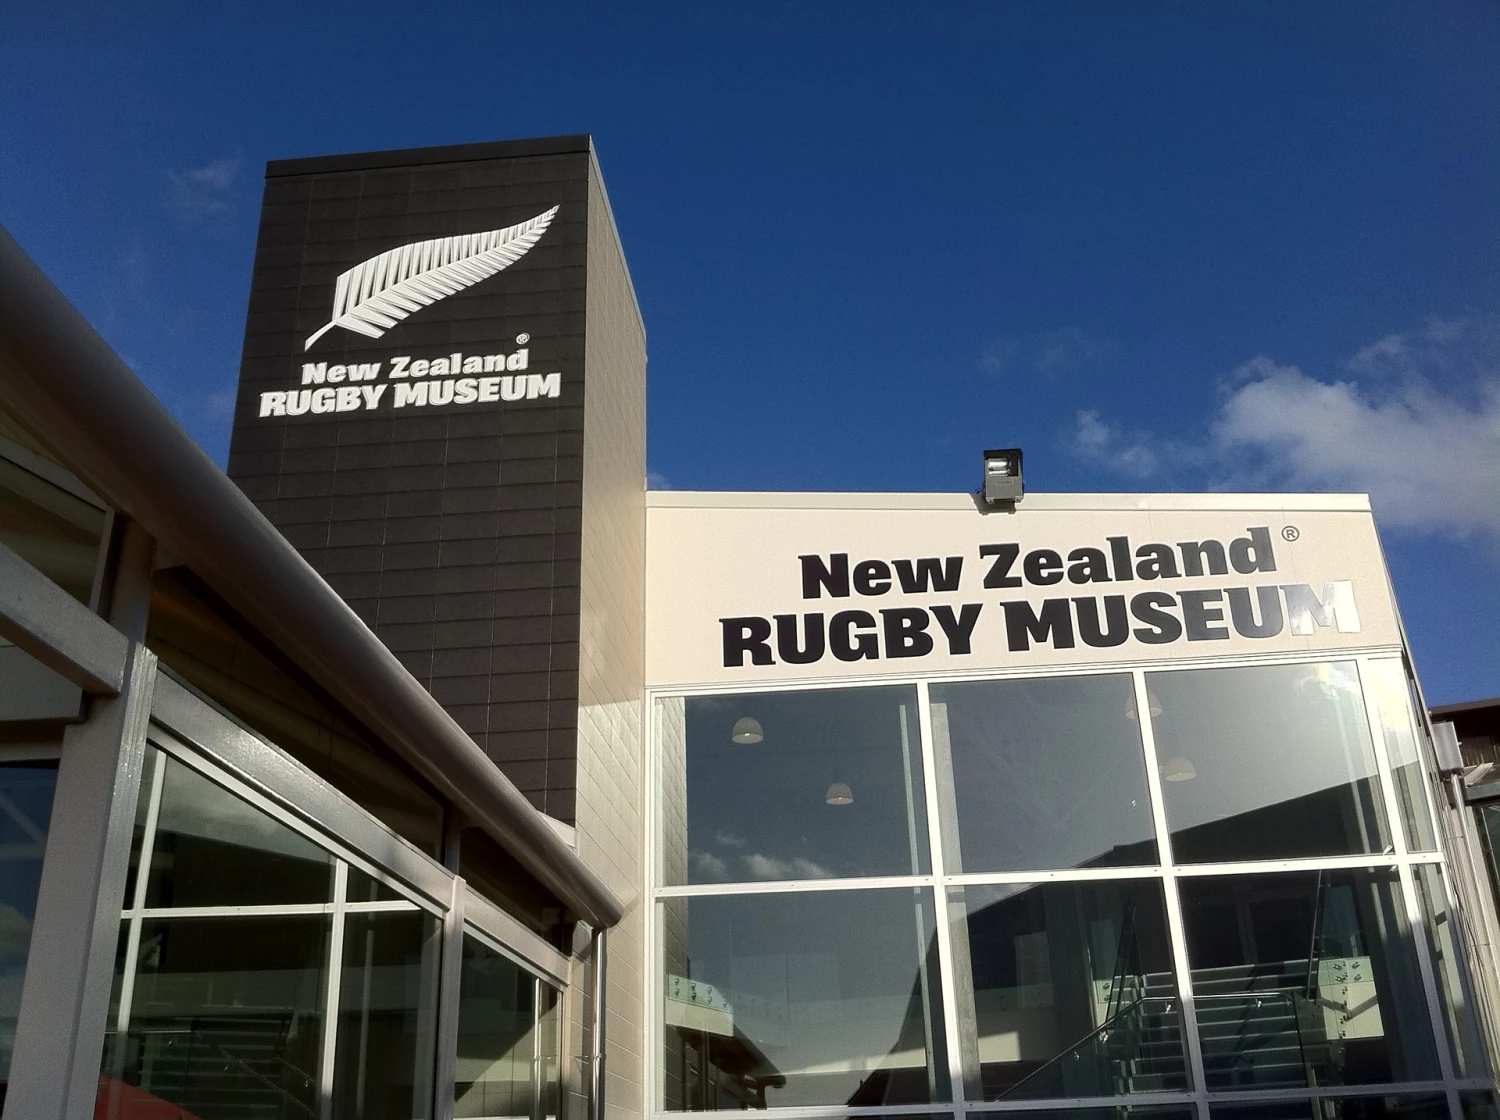 New Zealand Rugby Museum - Credit: ManawatuNZ